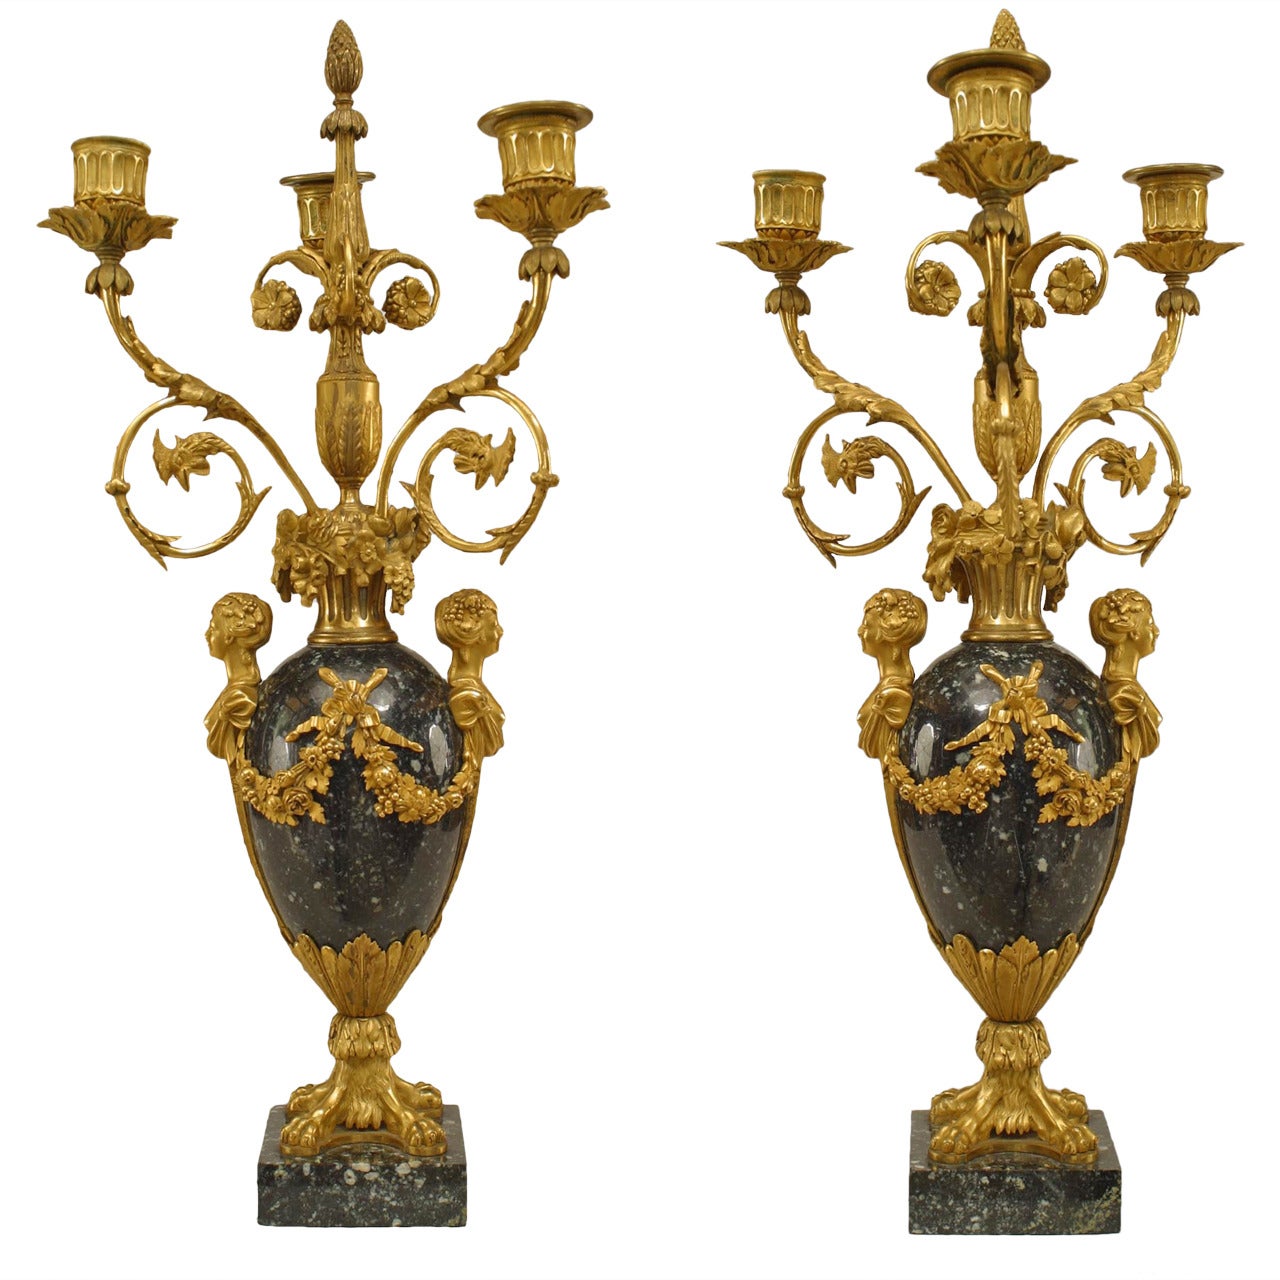 Pair of French Victorian Marble and Gilt Bronze Candelabras